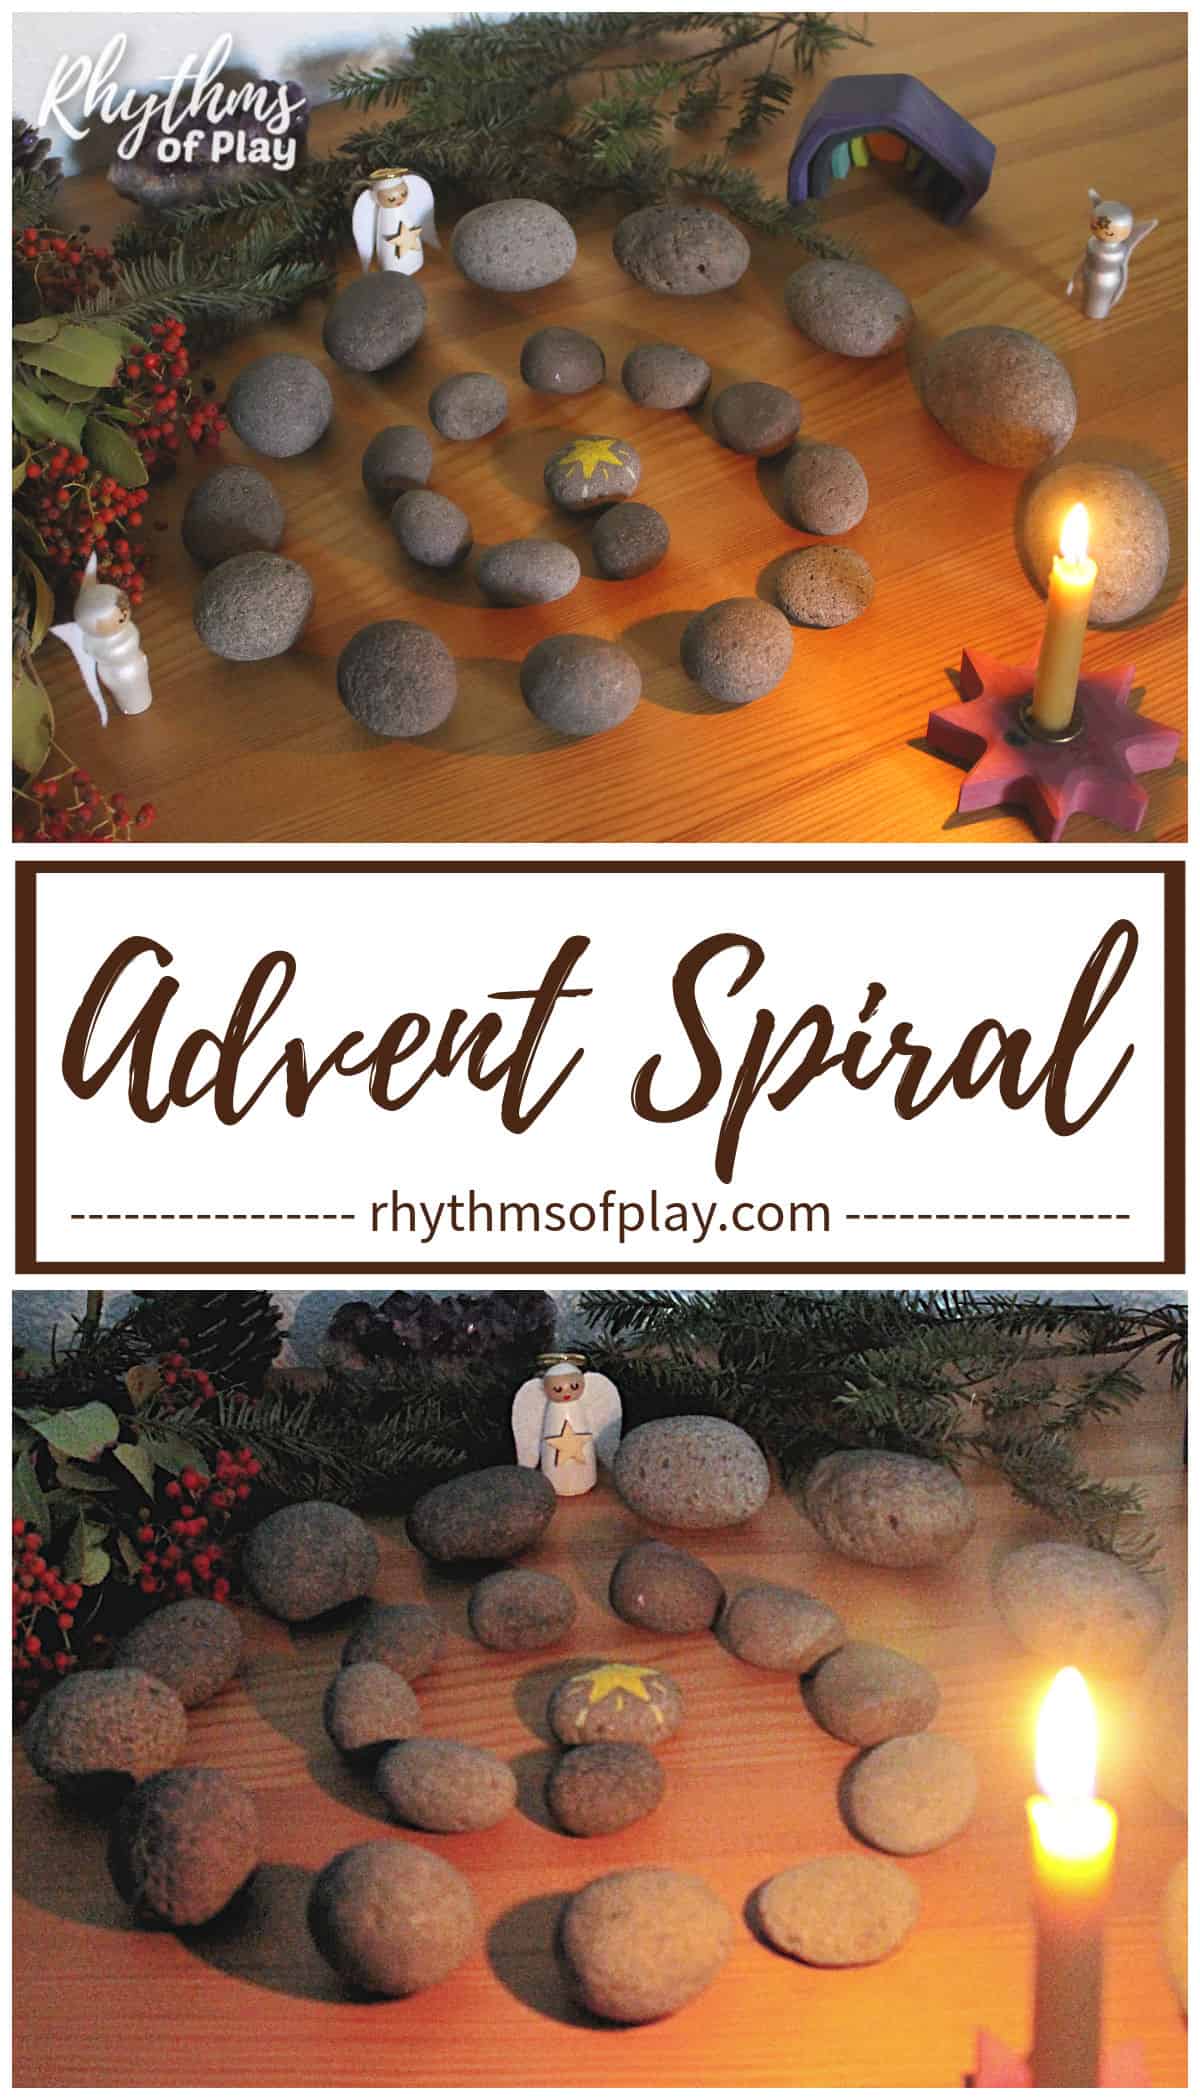 Advent spiral Christmas countdown calendar made with natural materials